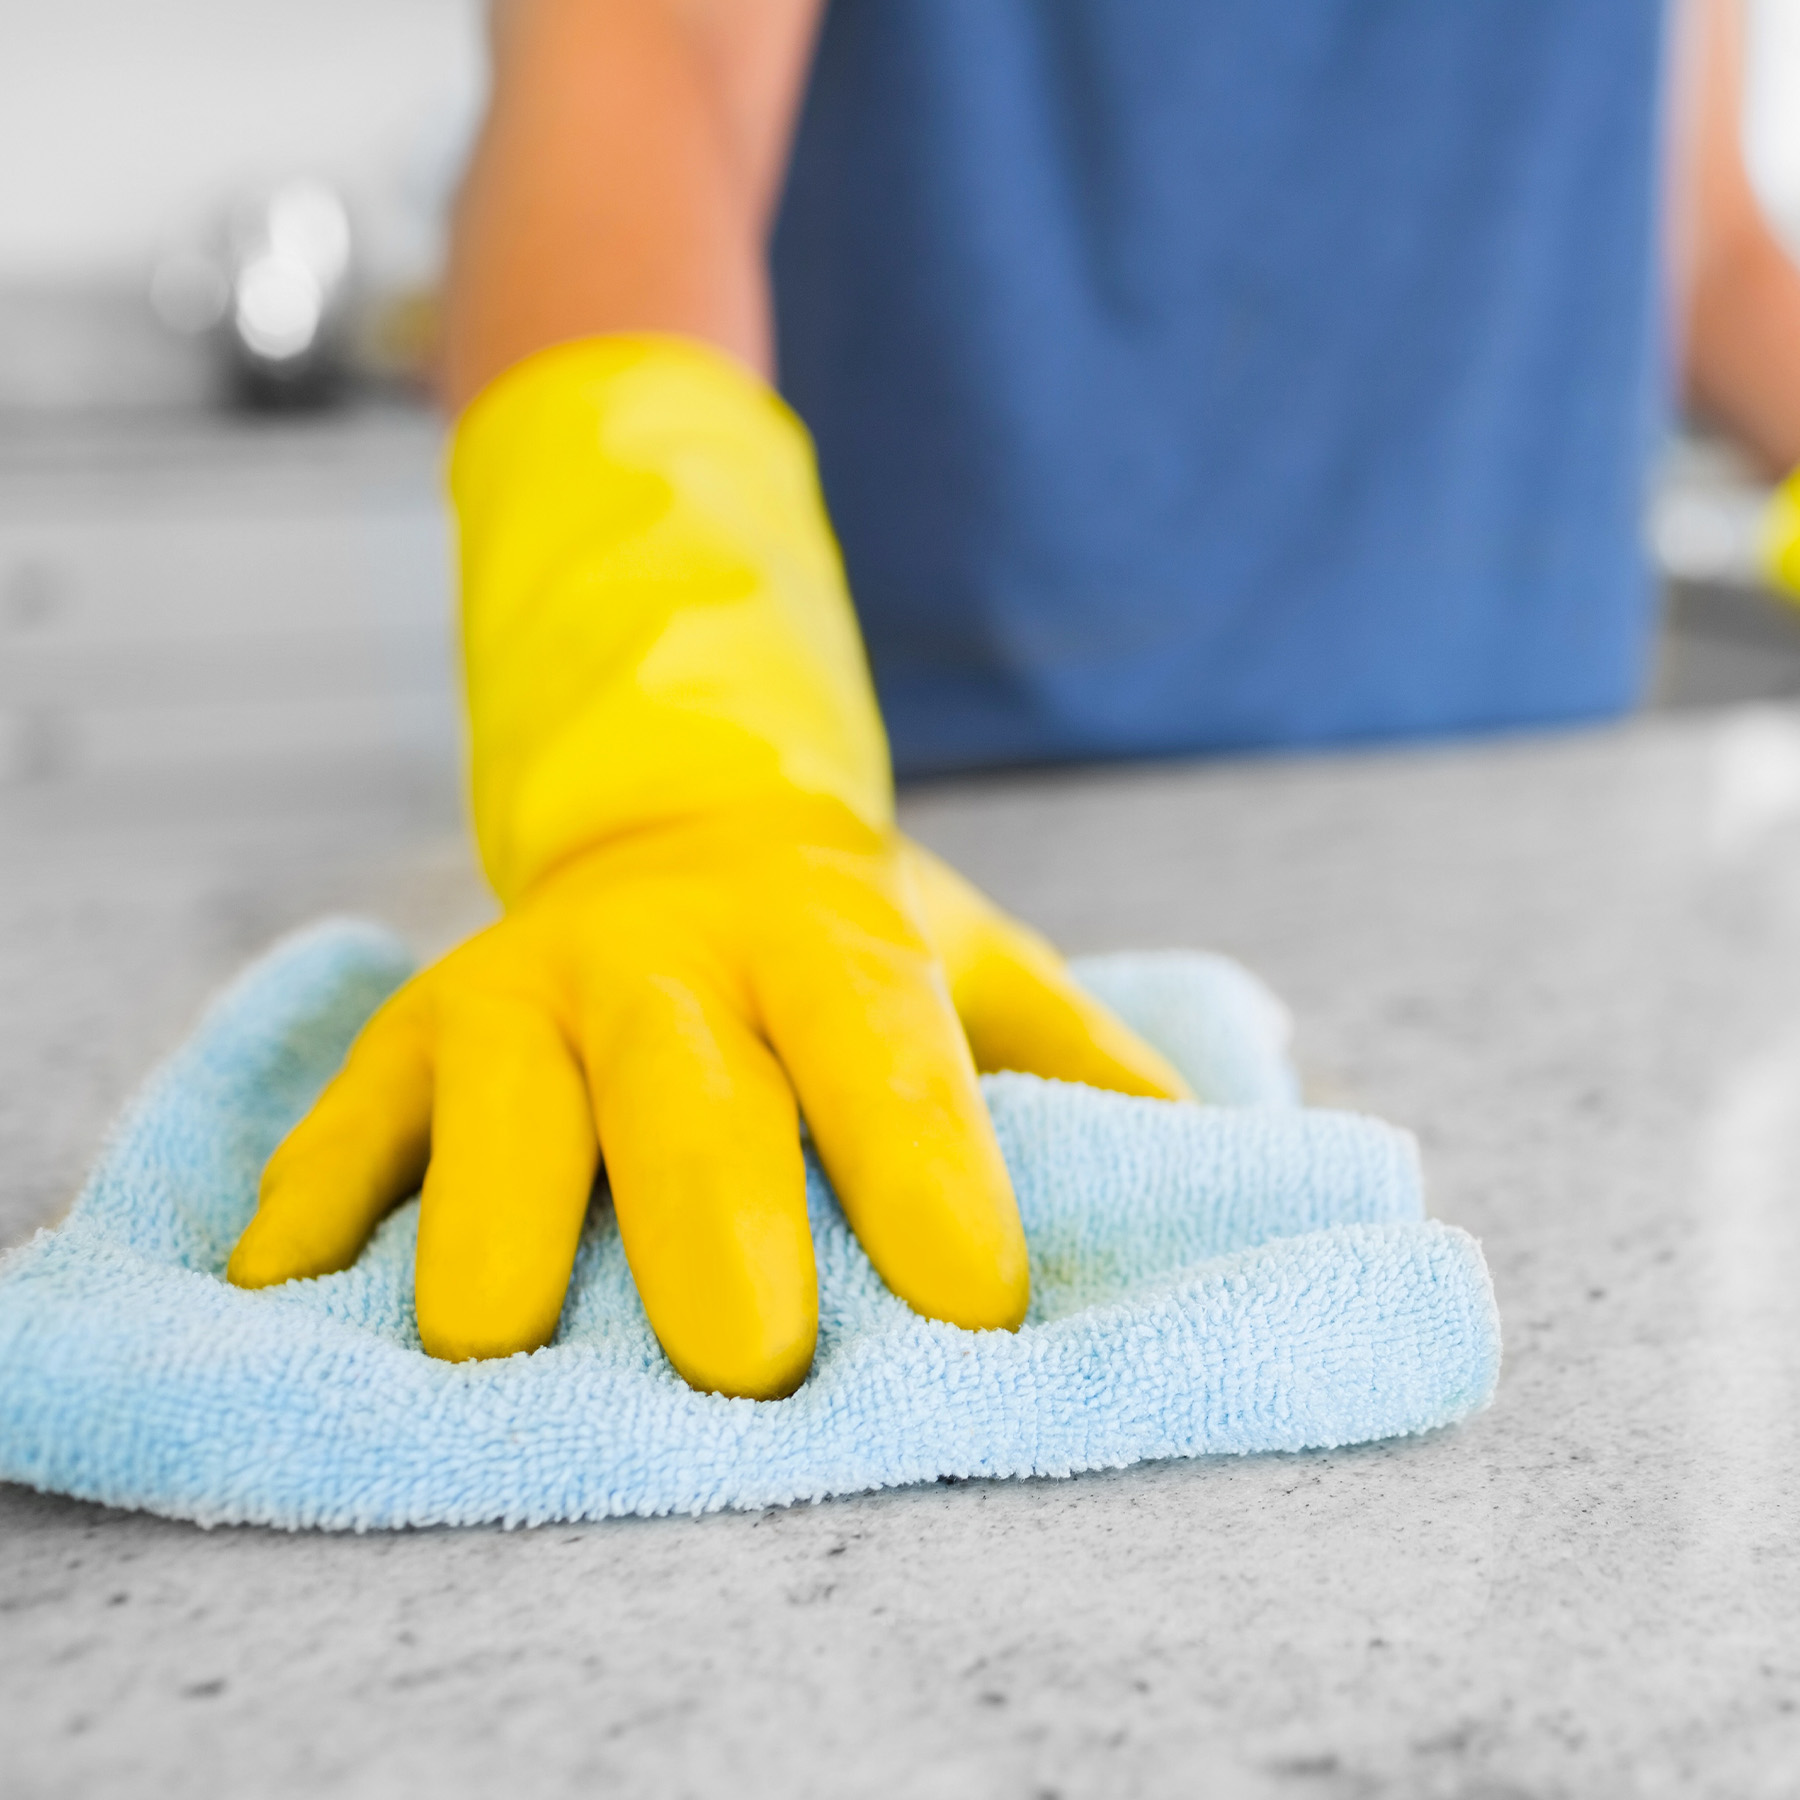 gloved hand cleaning kitchen counter with rag